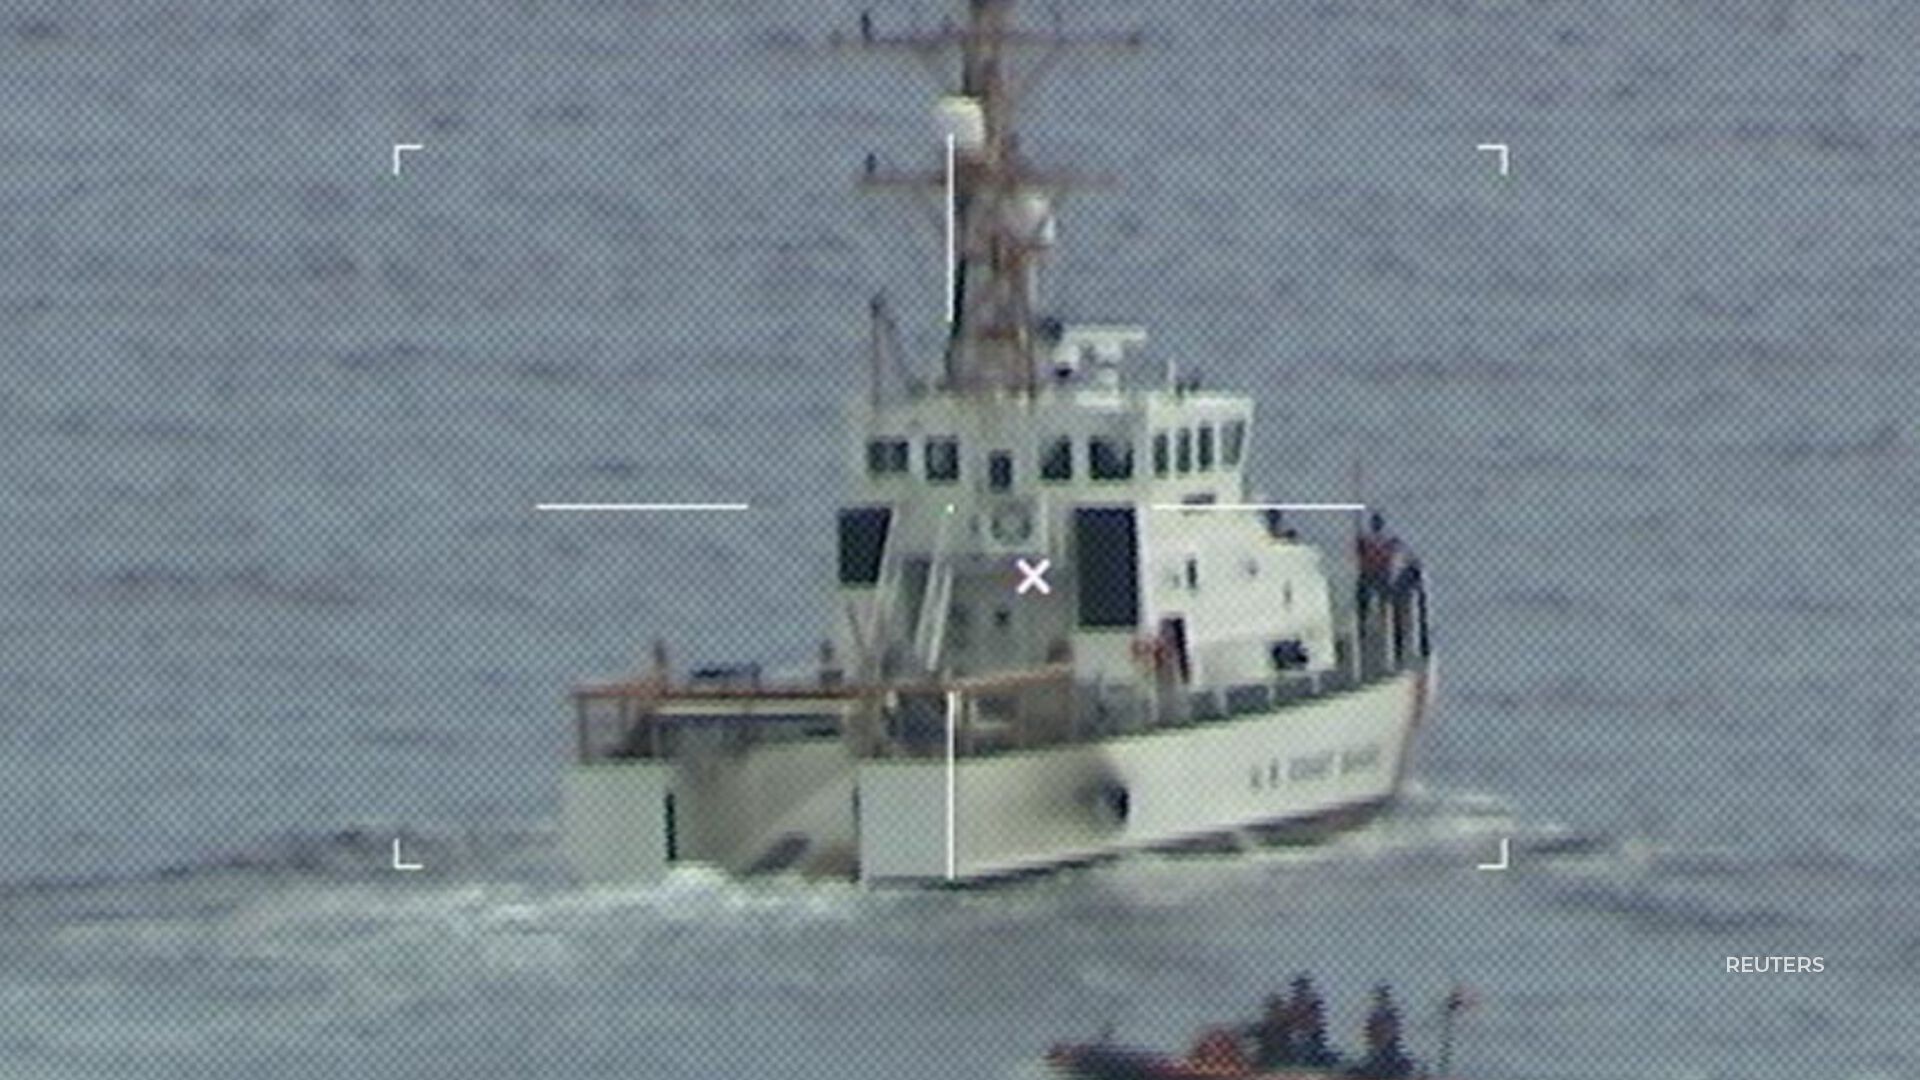 The Coast Guard will suspend its search for a suspected human smuggling boat.